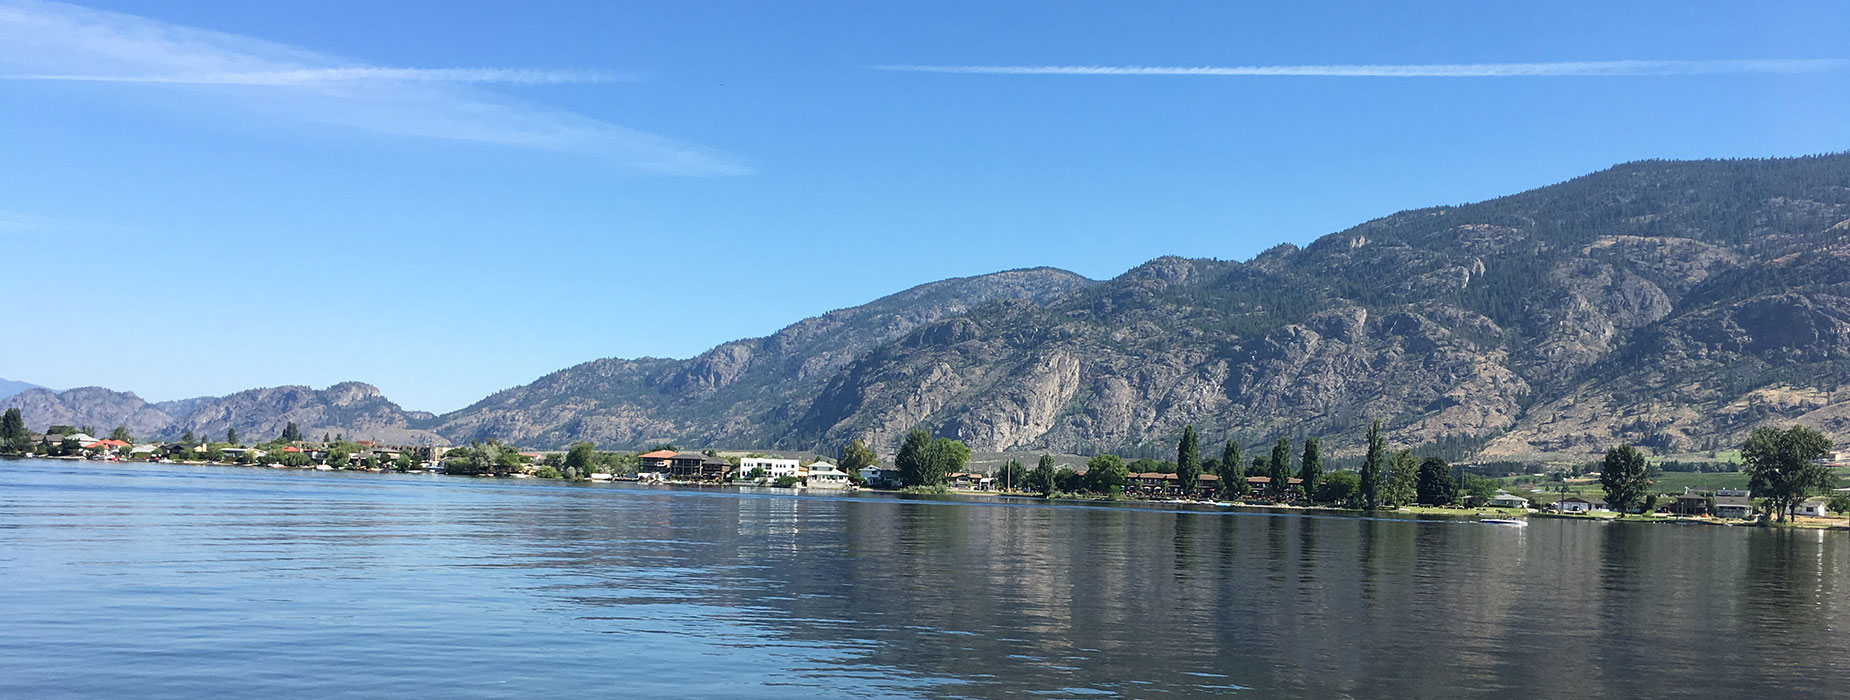 EasyGo Holidays offers a fabulous alternative to hotel living when you are visiting the Okanagan Valley.